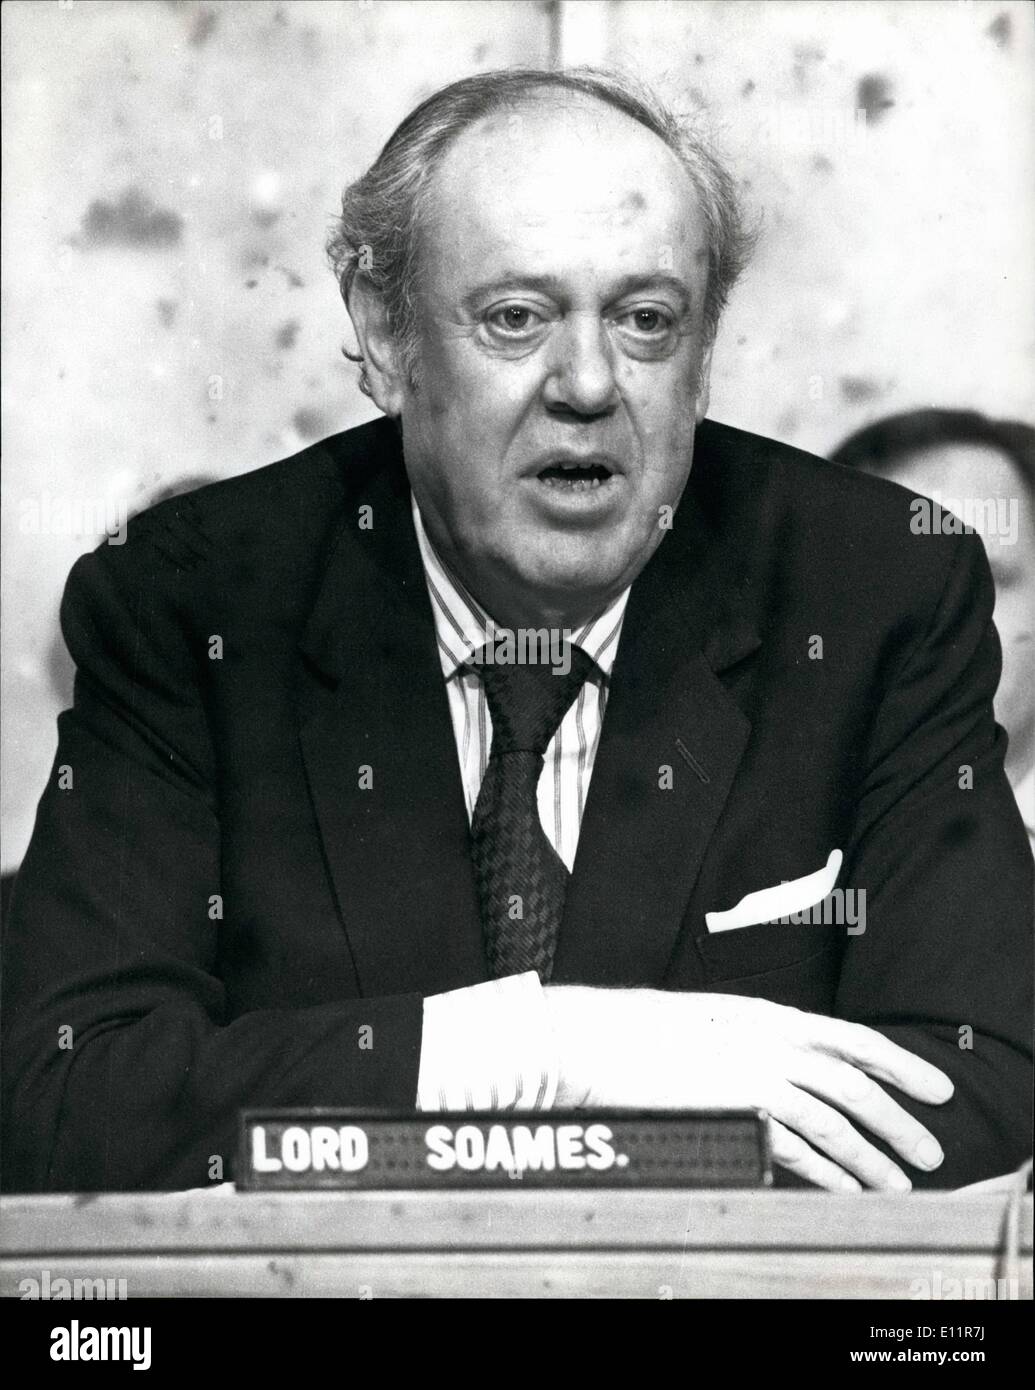 Dec. 12, 1979 - Lord Soames Holds Press Conference Lord Soames the new Governor of Zimbabwe Rhodesia, held a press conference this afternoon at the Government Press Center in London. Photo Shows: Lord Soames seen during his press conference today. Stock Photo